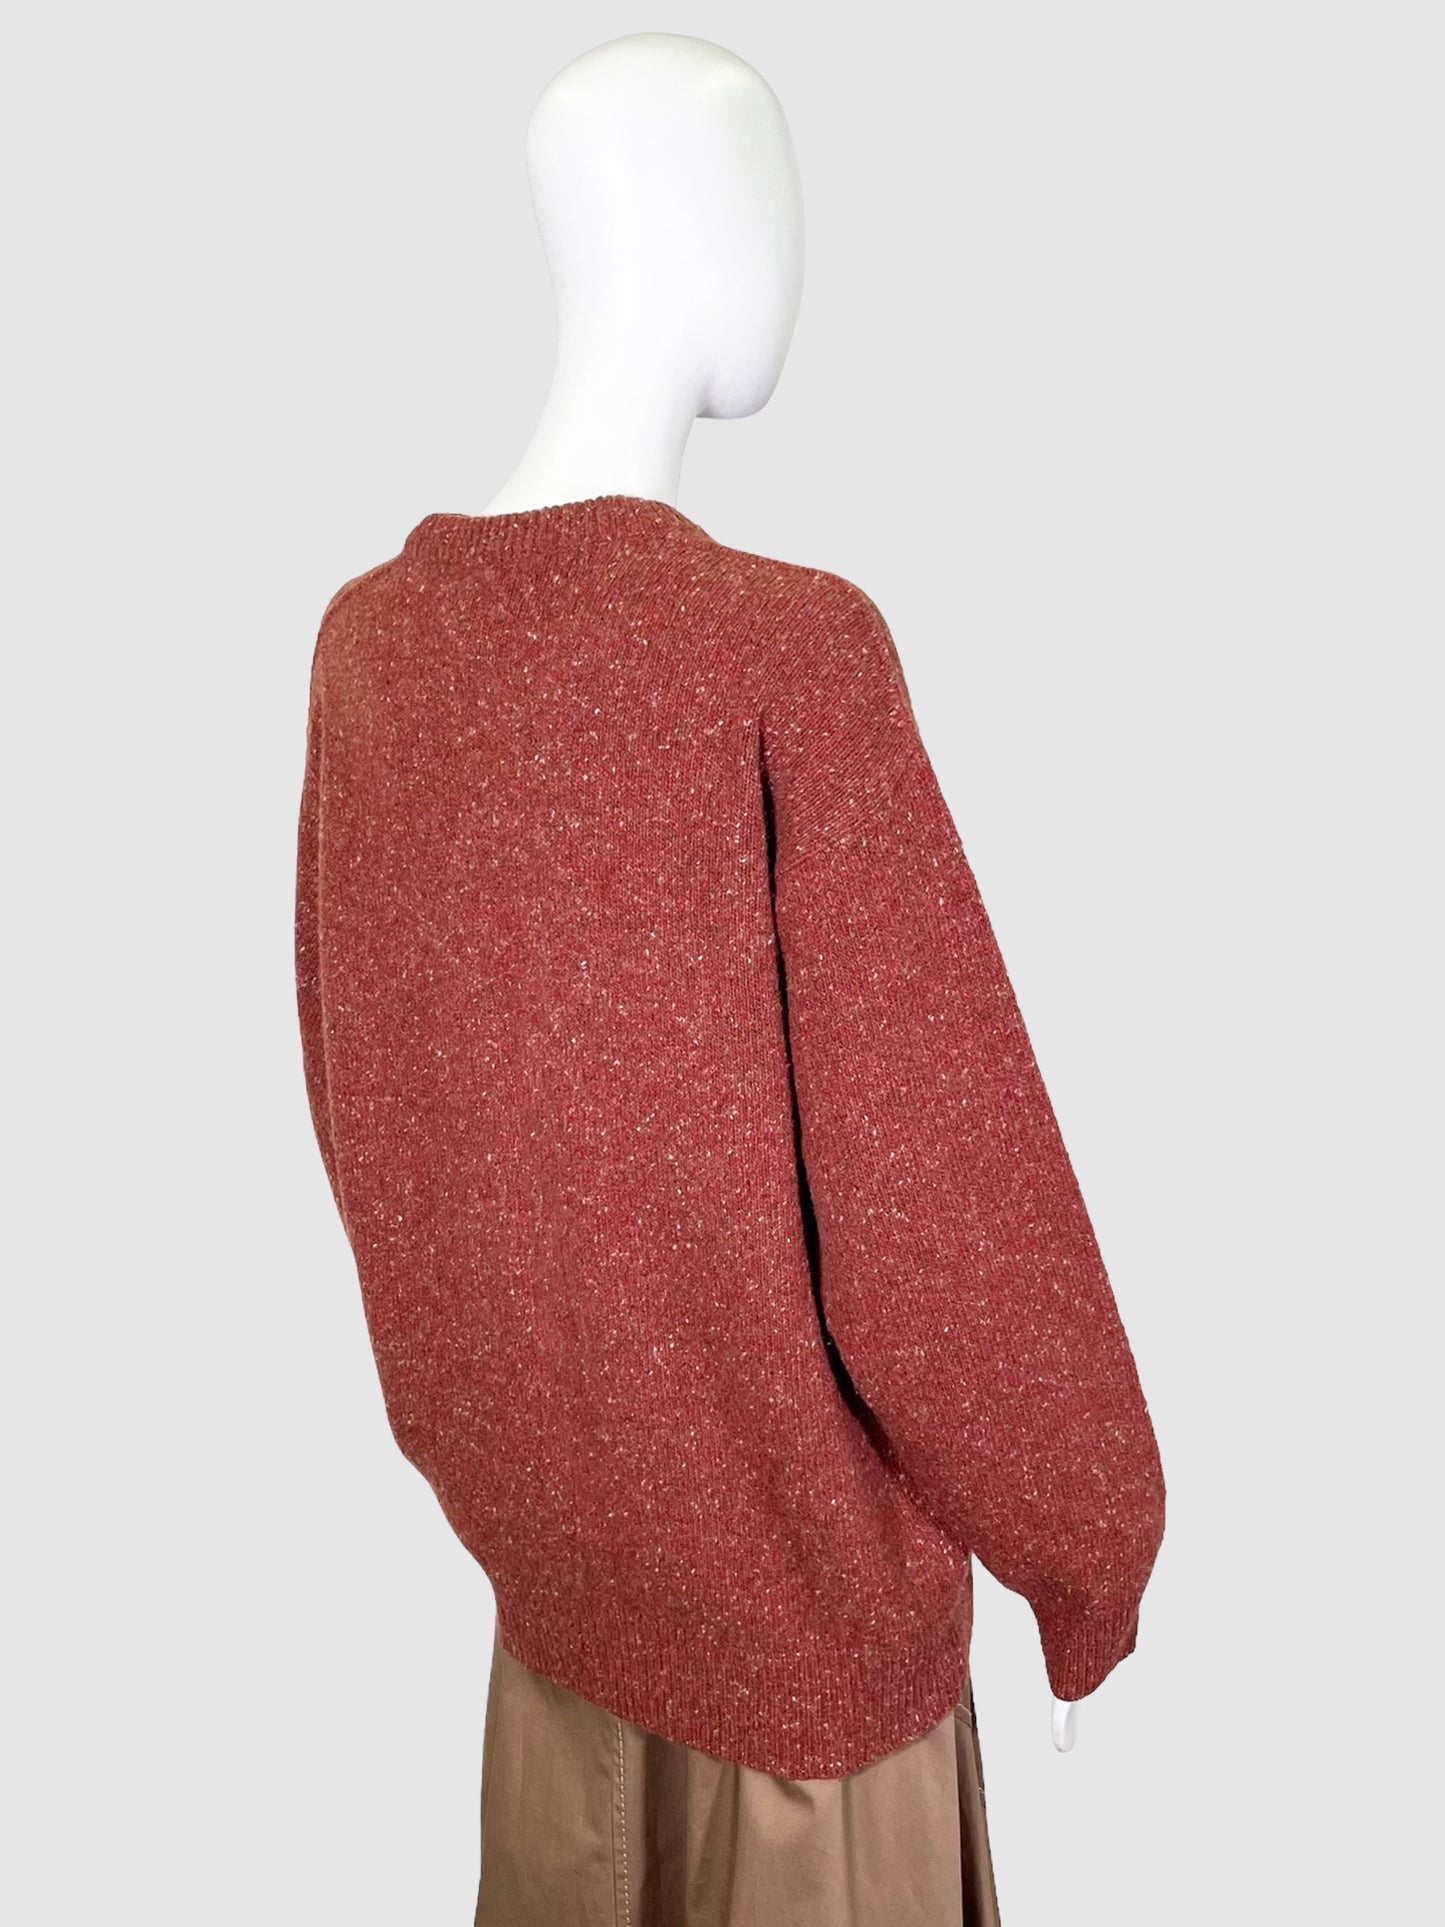 Hermes Cashmere Sweater - Size M